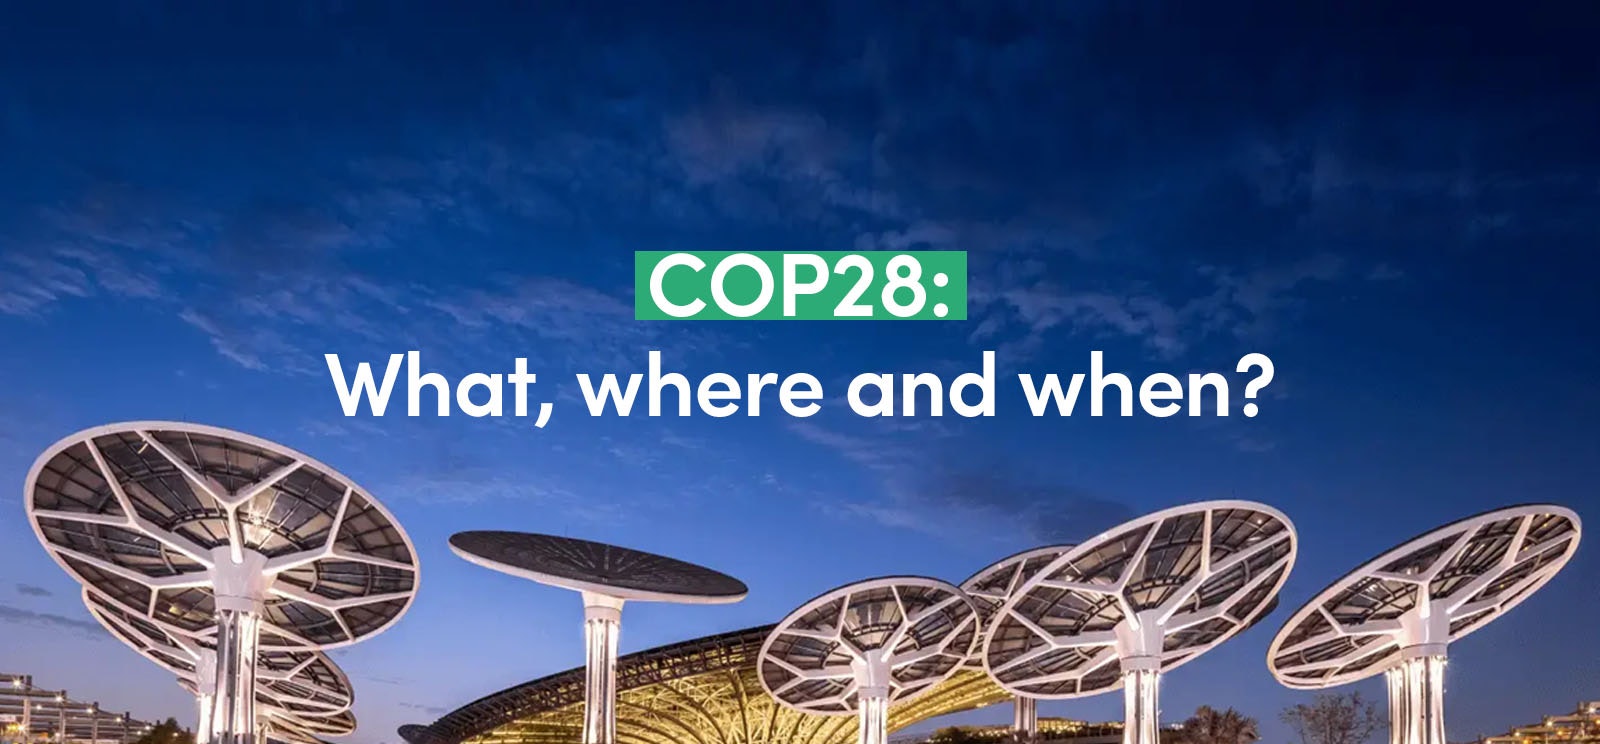 COP28: What, where and when?